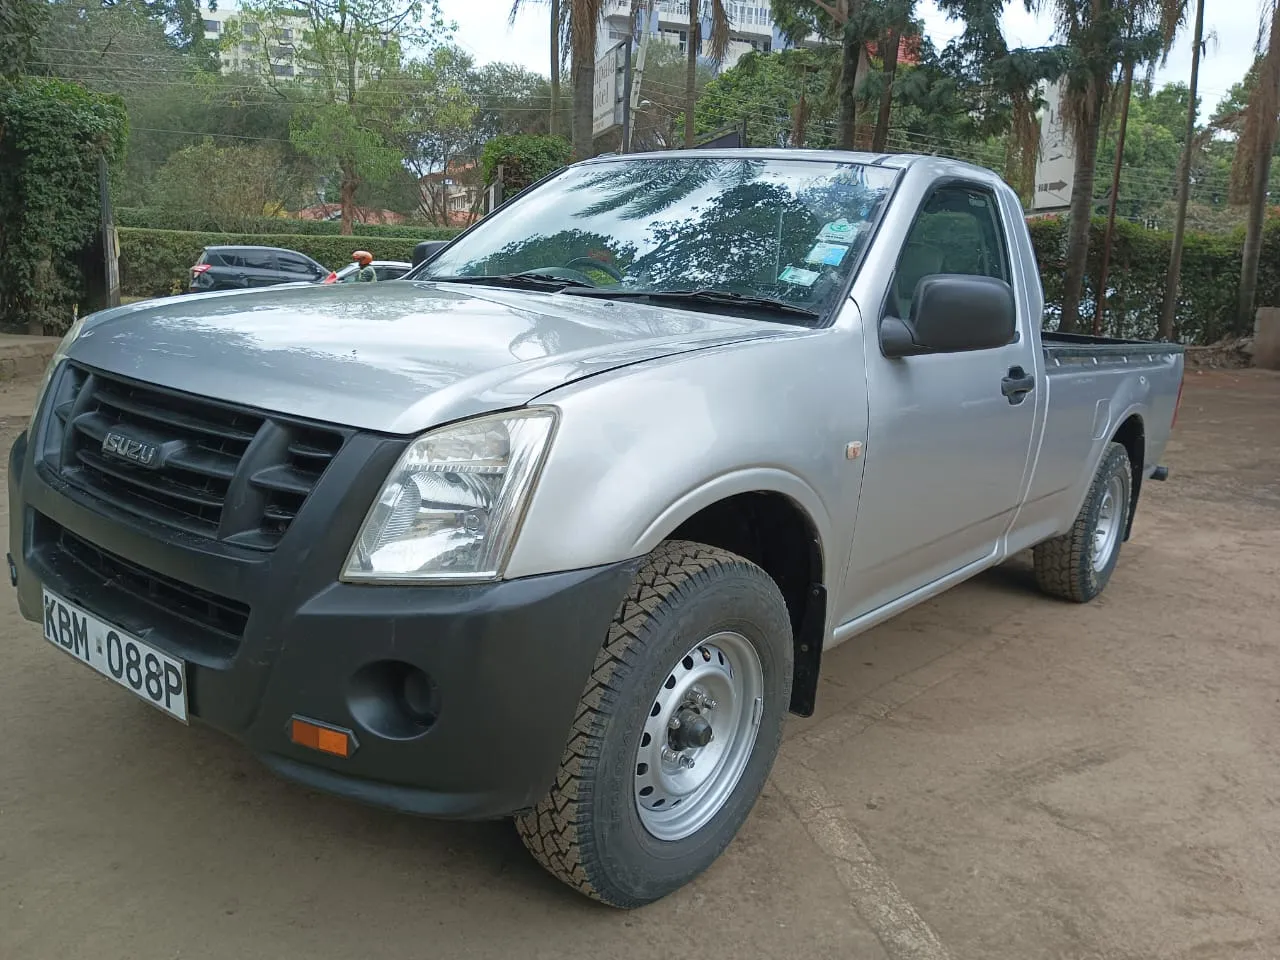 Isuzu D-max 2010 local assembly Exclusive